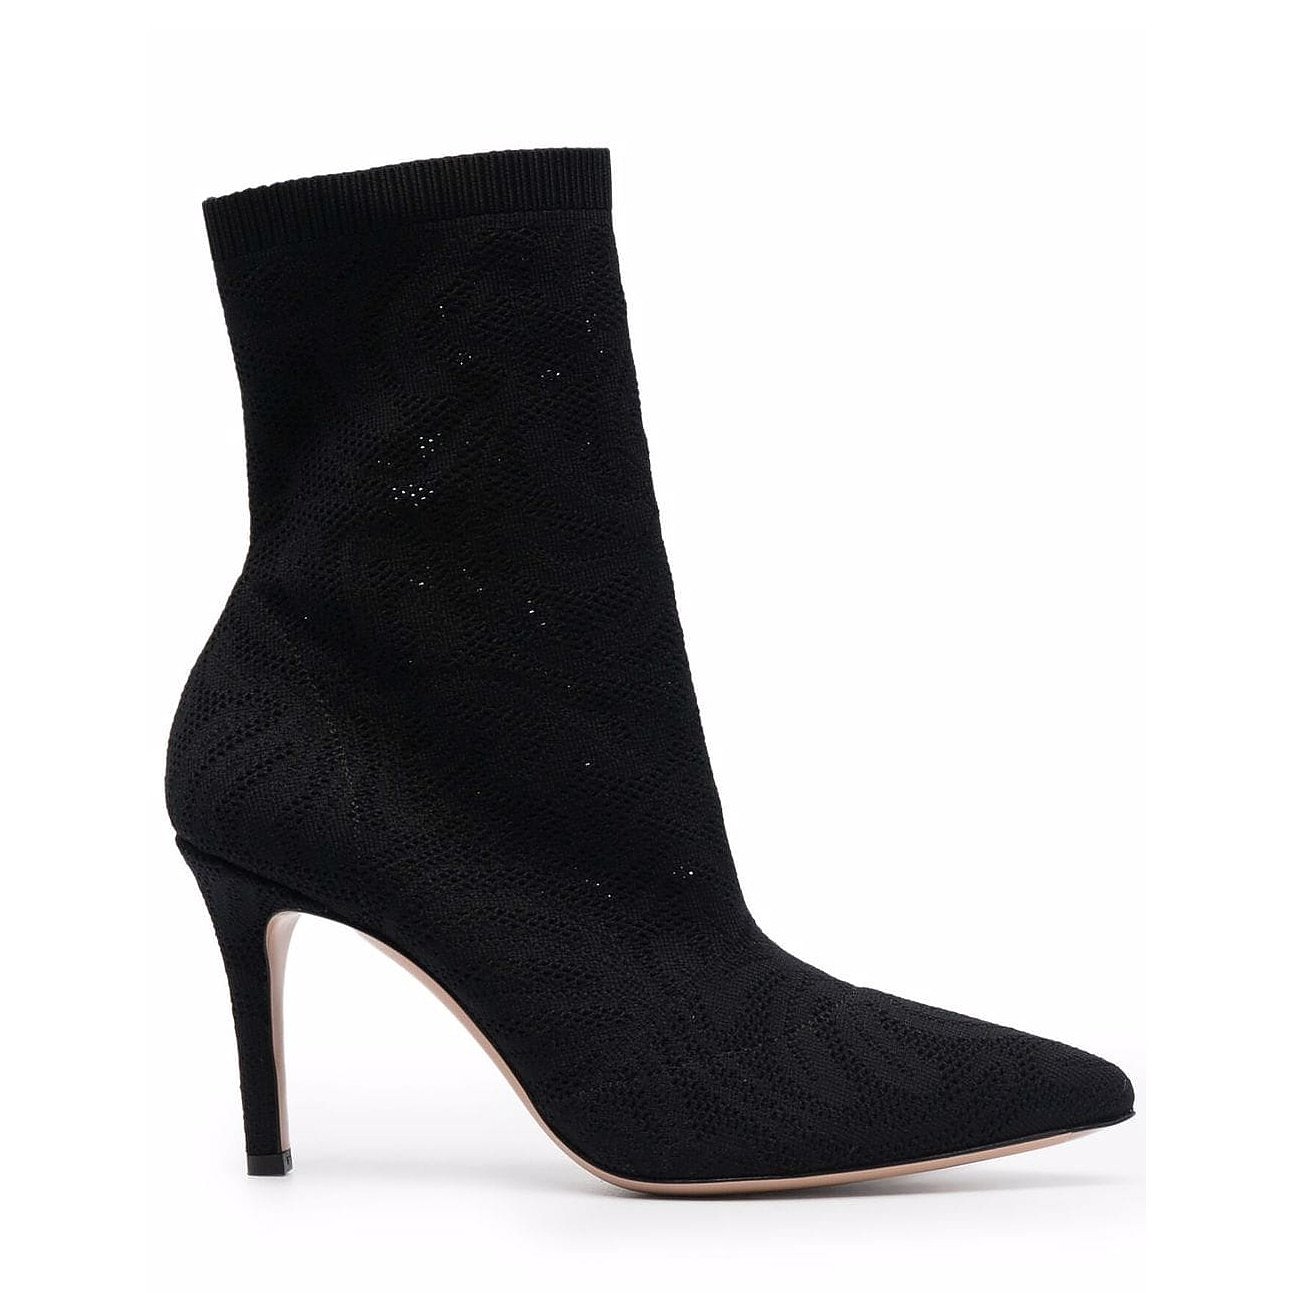 GIANVITO ROSSI Pointed Toe Ankle Boots